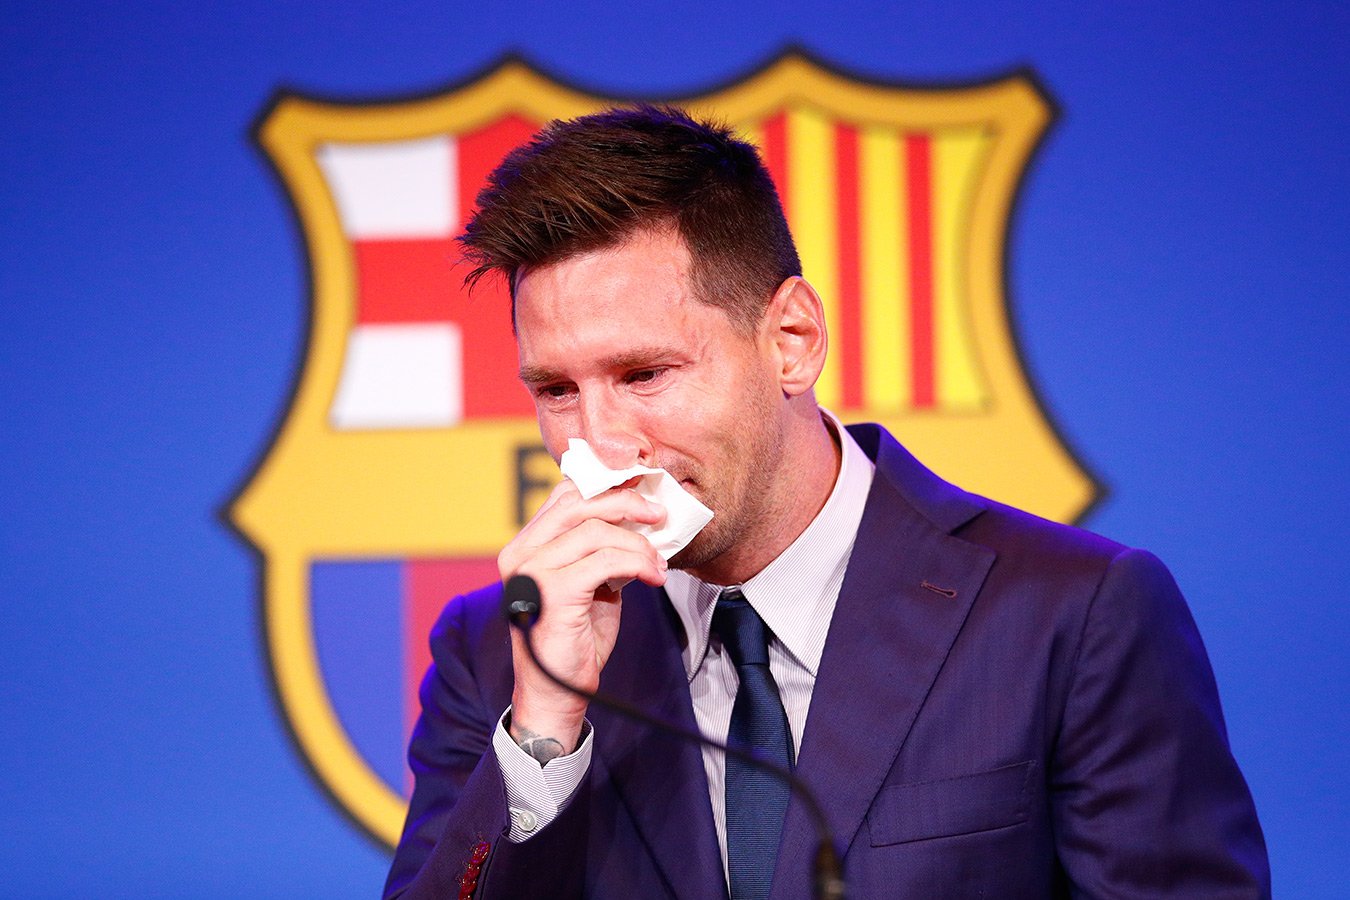 Lionel Messi's personal data leaked online in major data breach